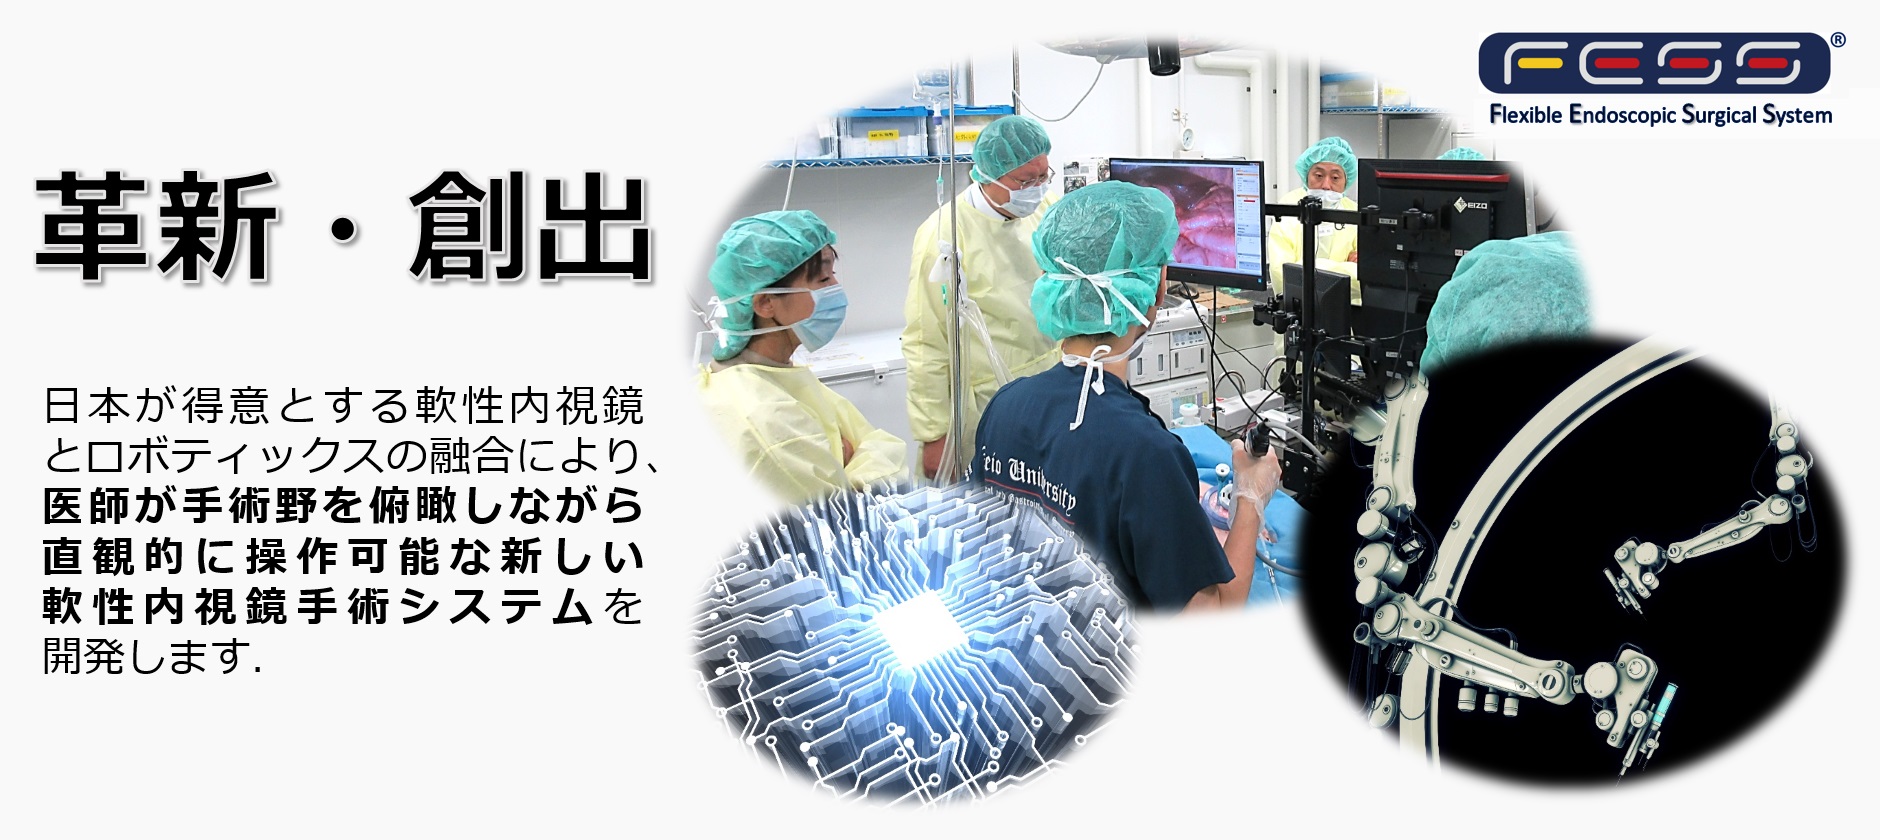 「Flexible Endoscopic Surgical System；FESS」トップ